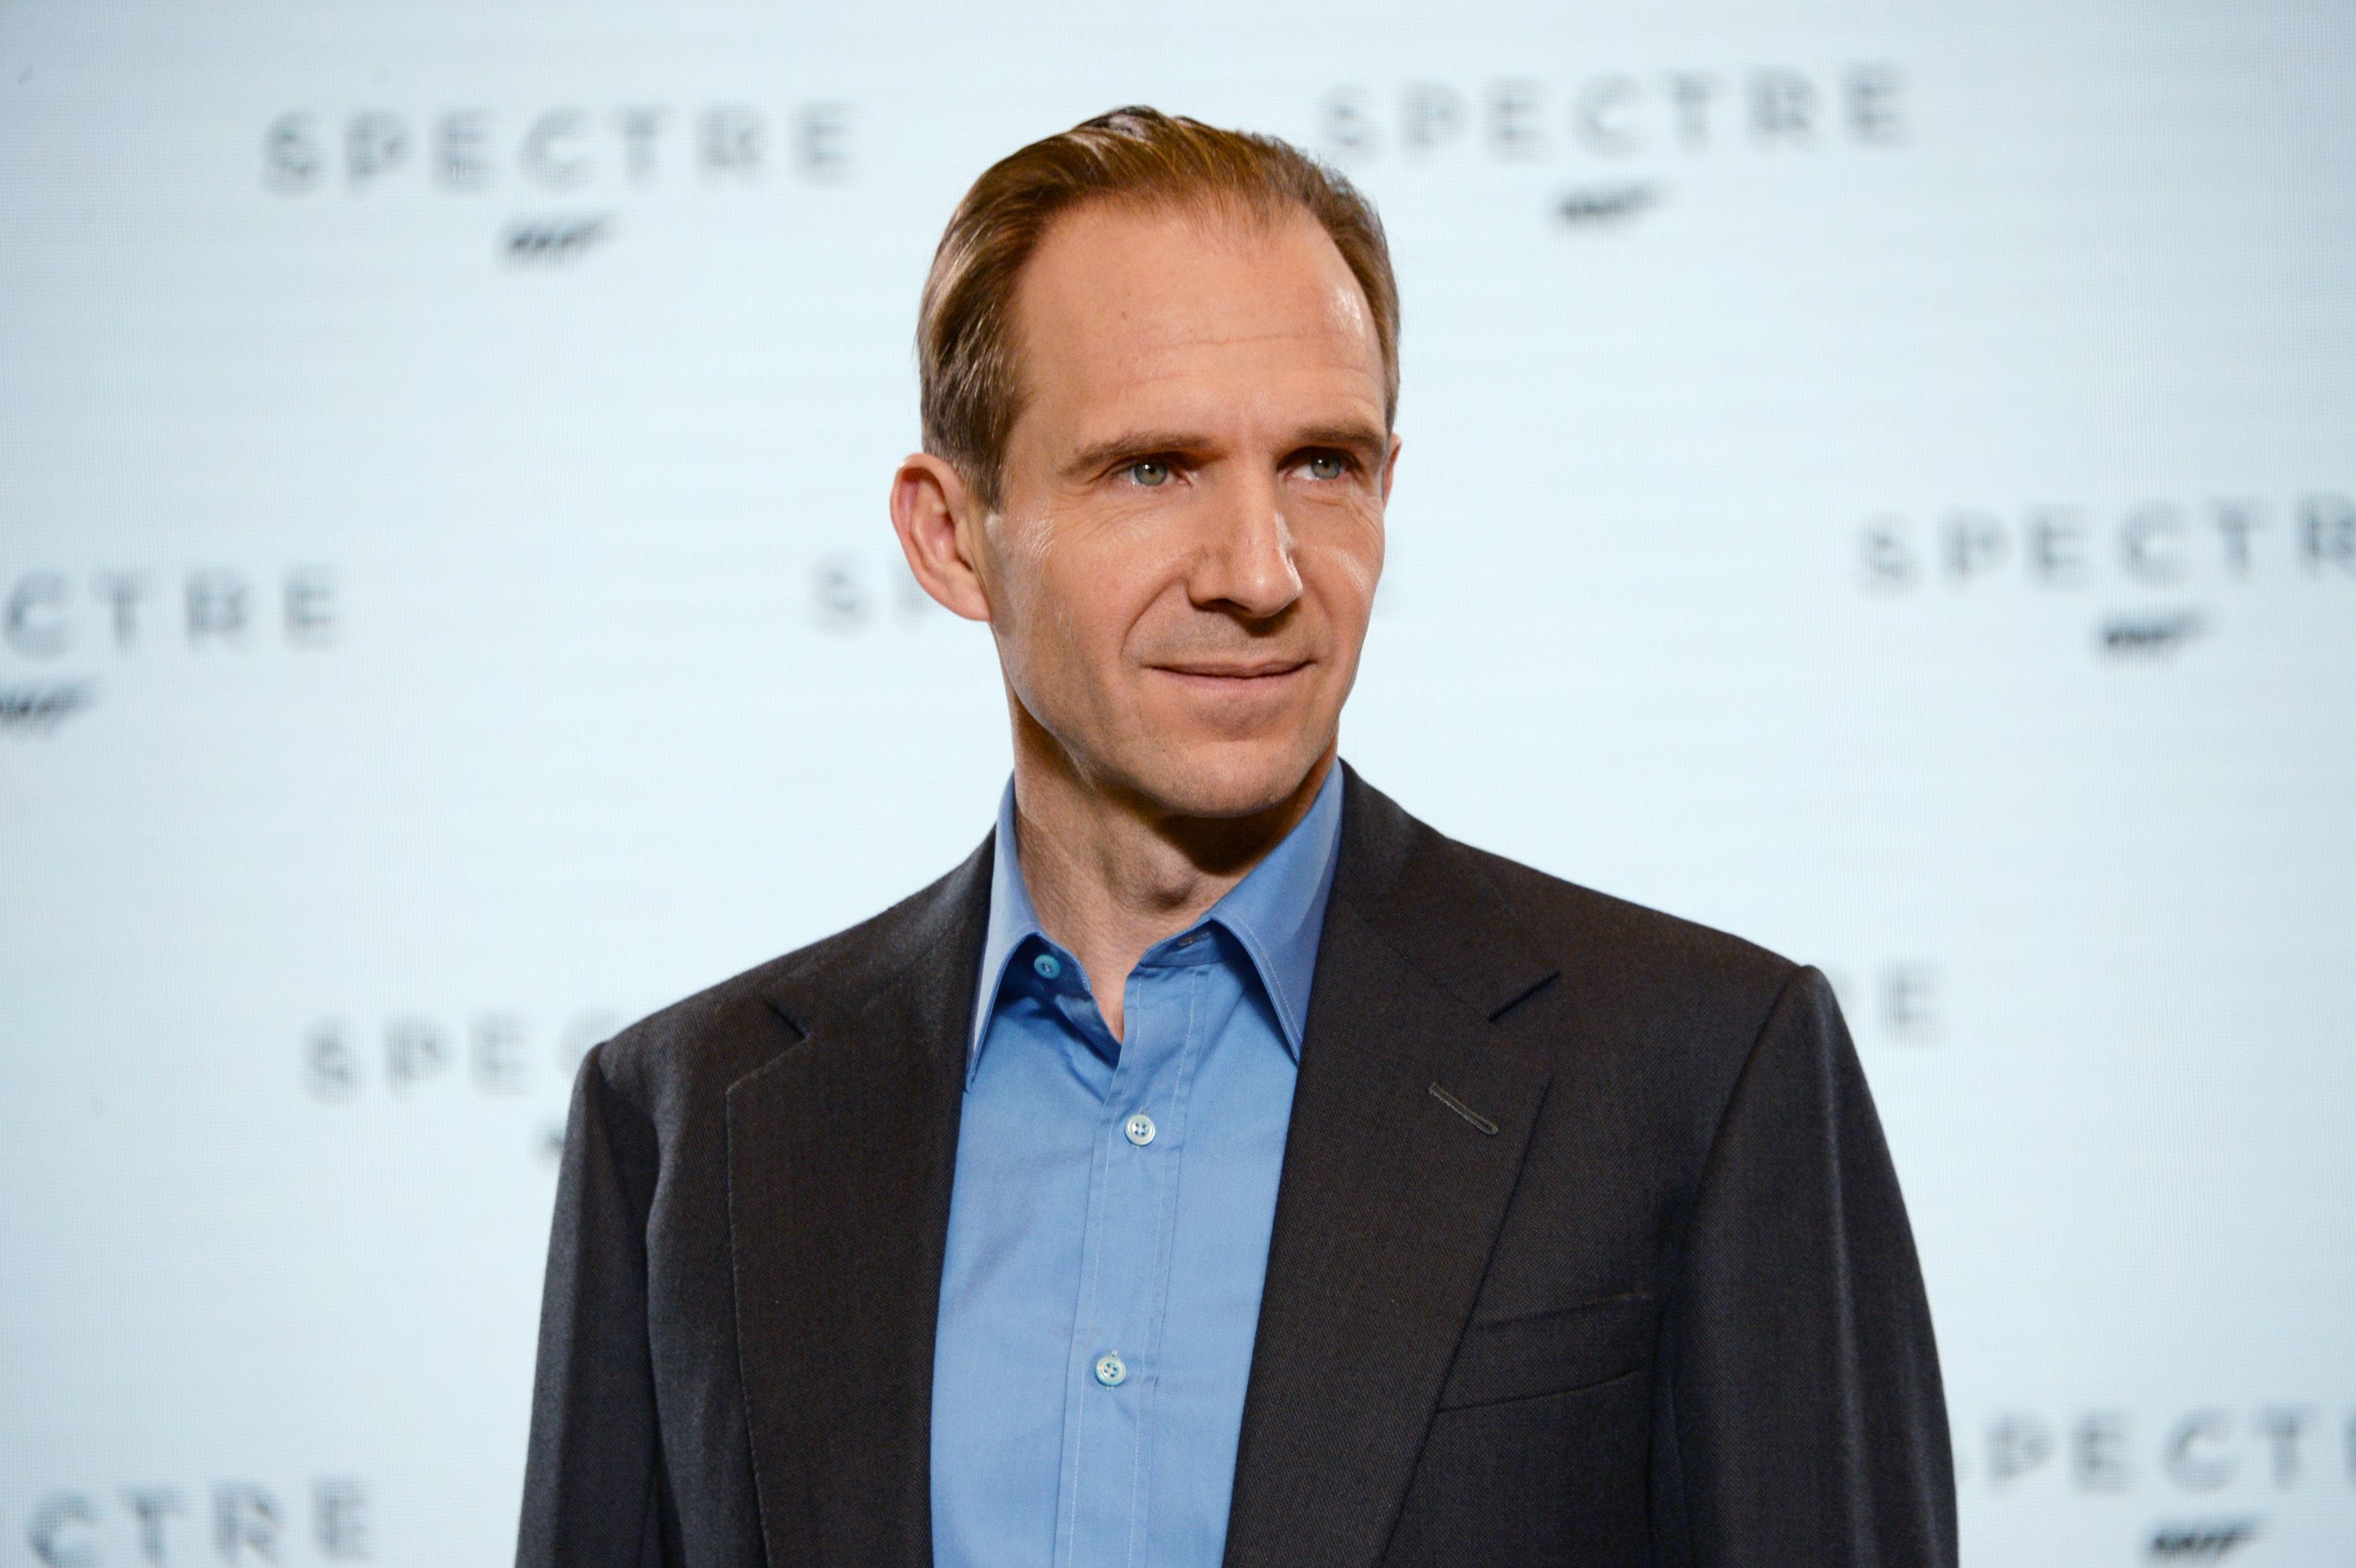 The Lego Batman Movie casts Ralph Fiennes as the voice of Alfred Pennyworth